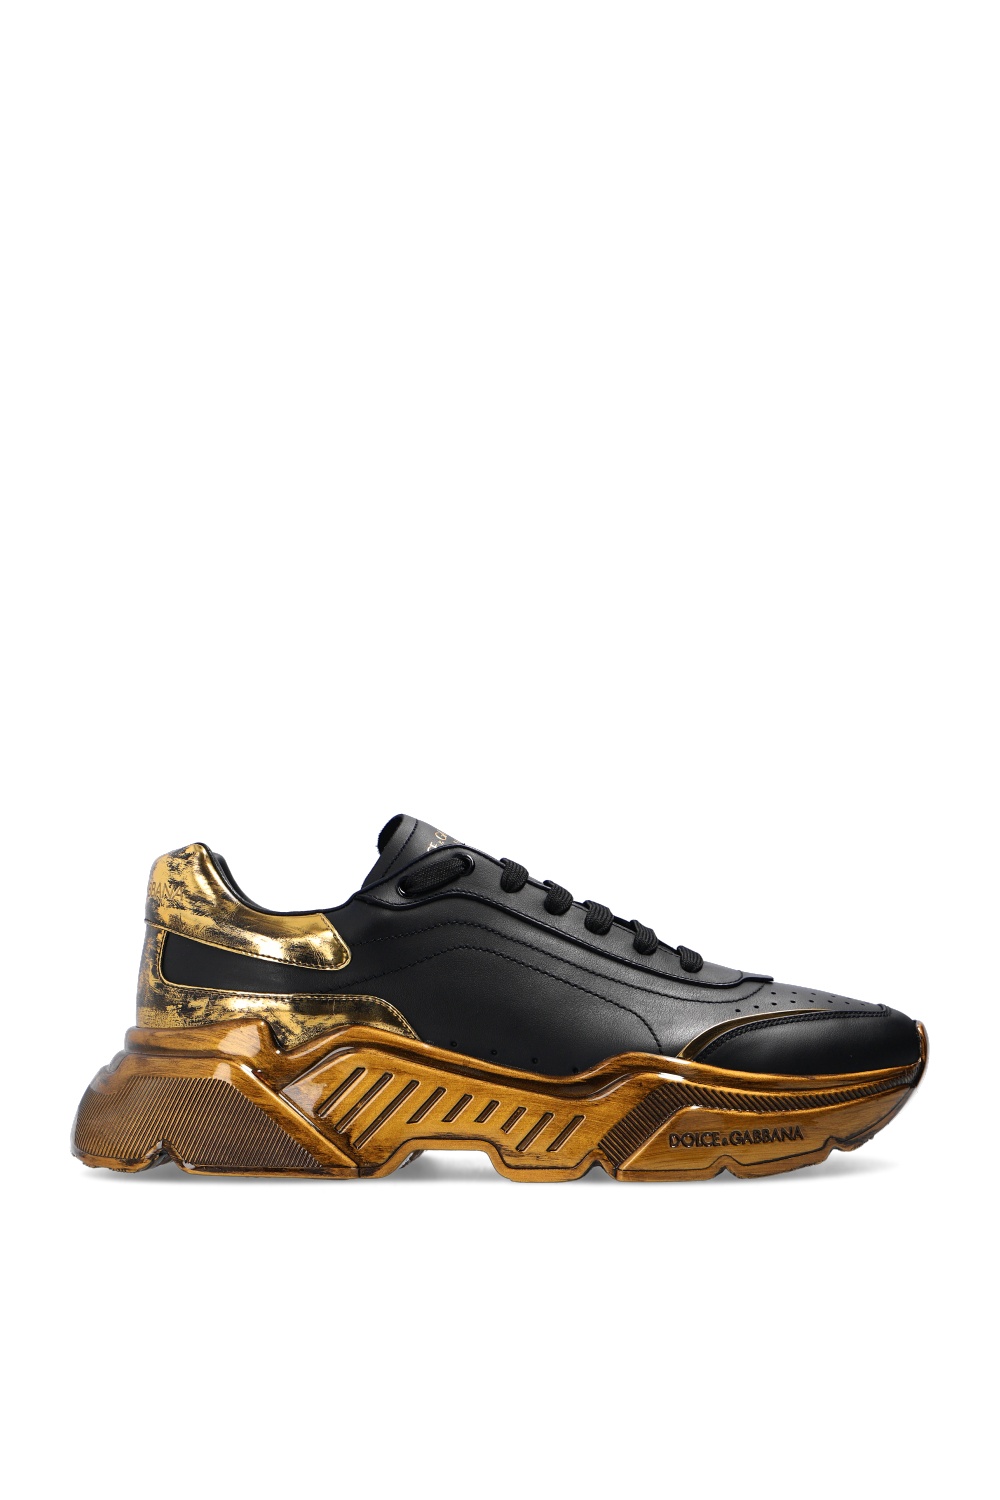 black and gold dolce and gabbana shoes